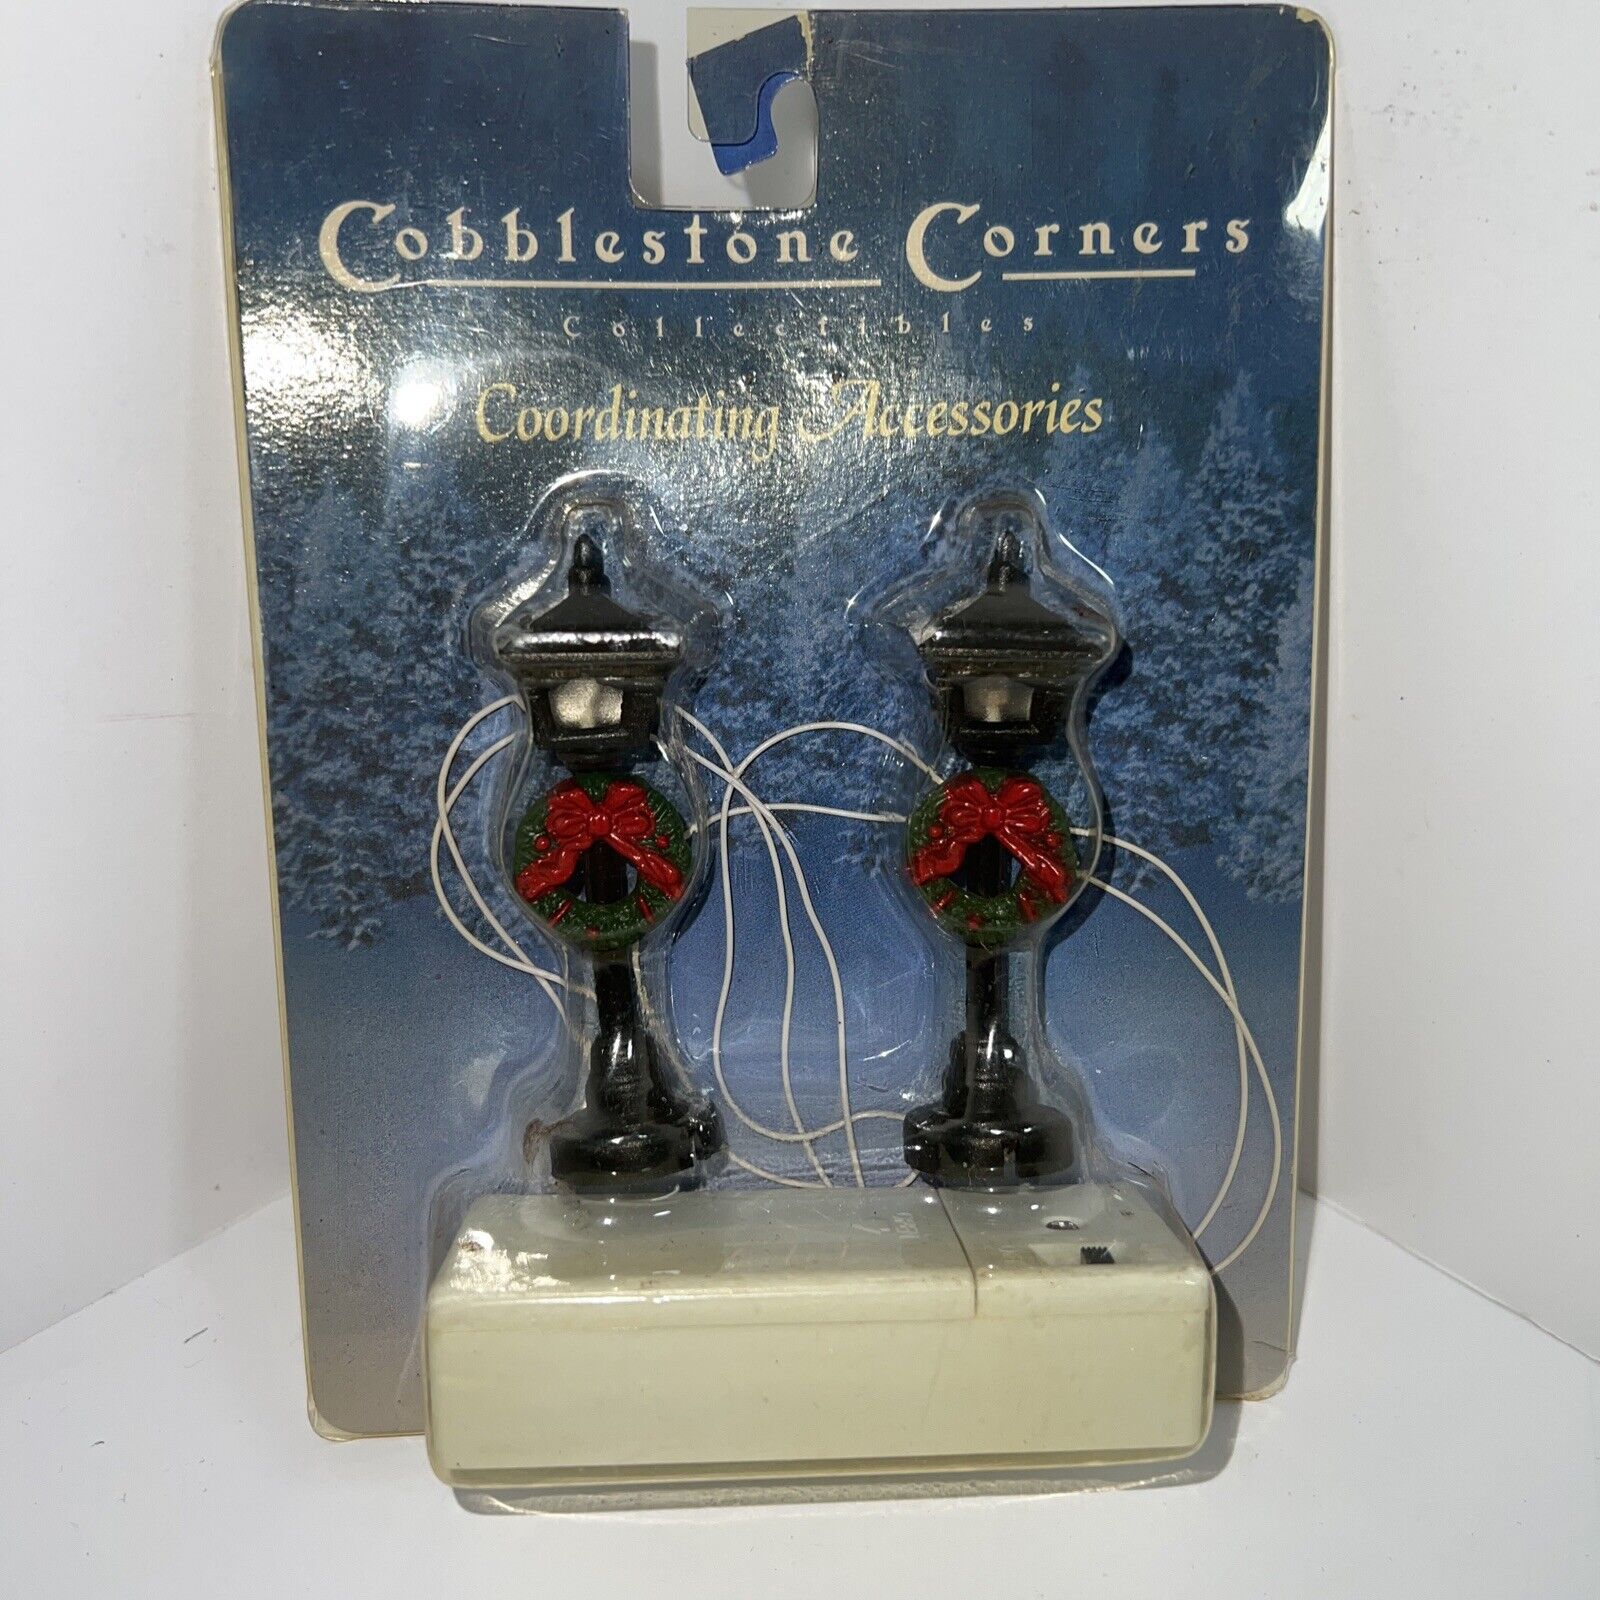 2 Cobblestone Corners Collectibles Accessories Lights Lamposts Wreaths